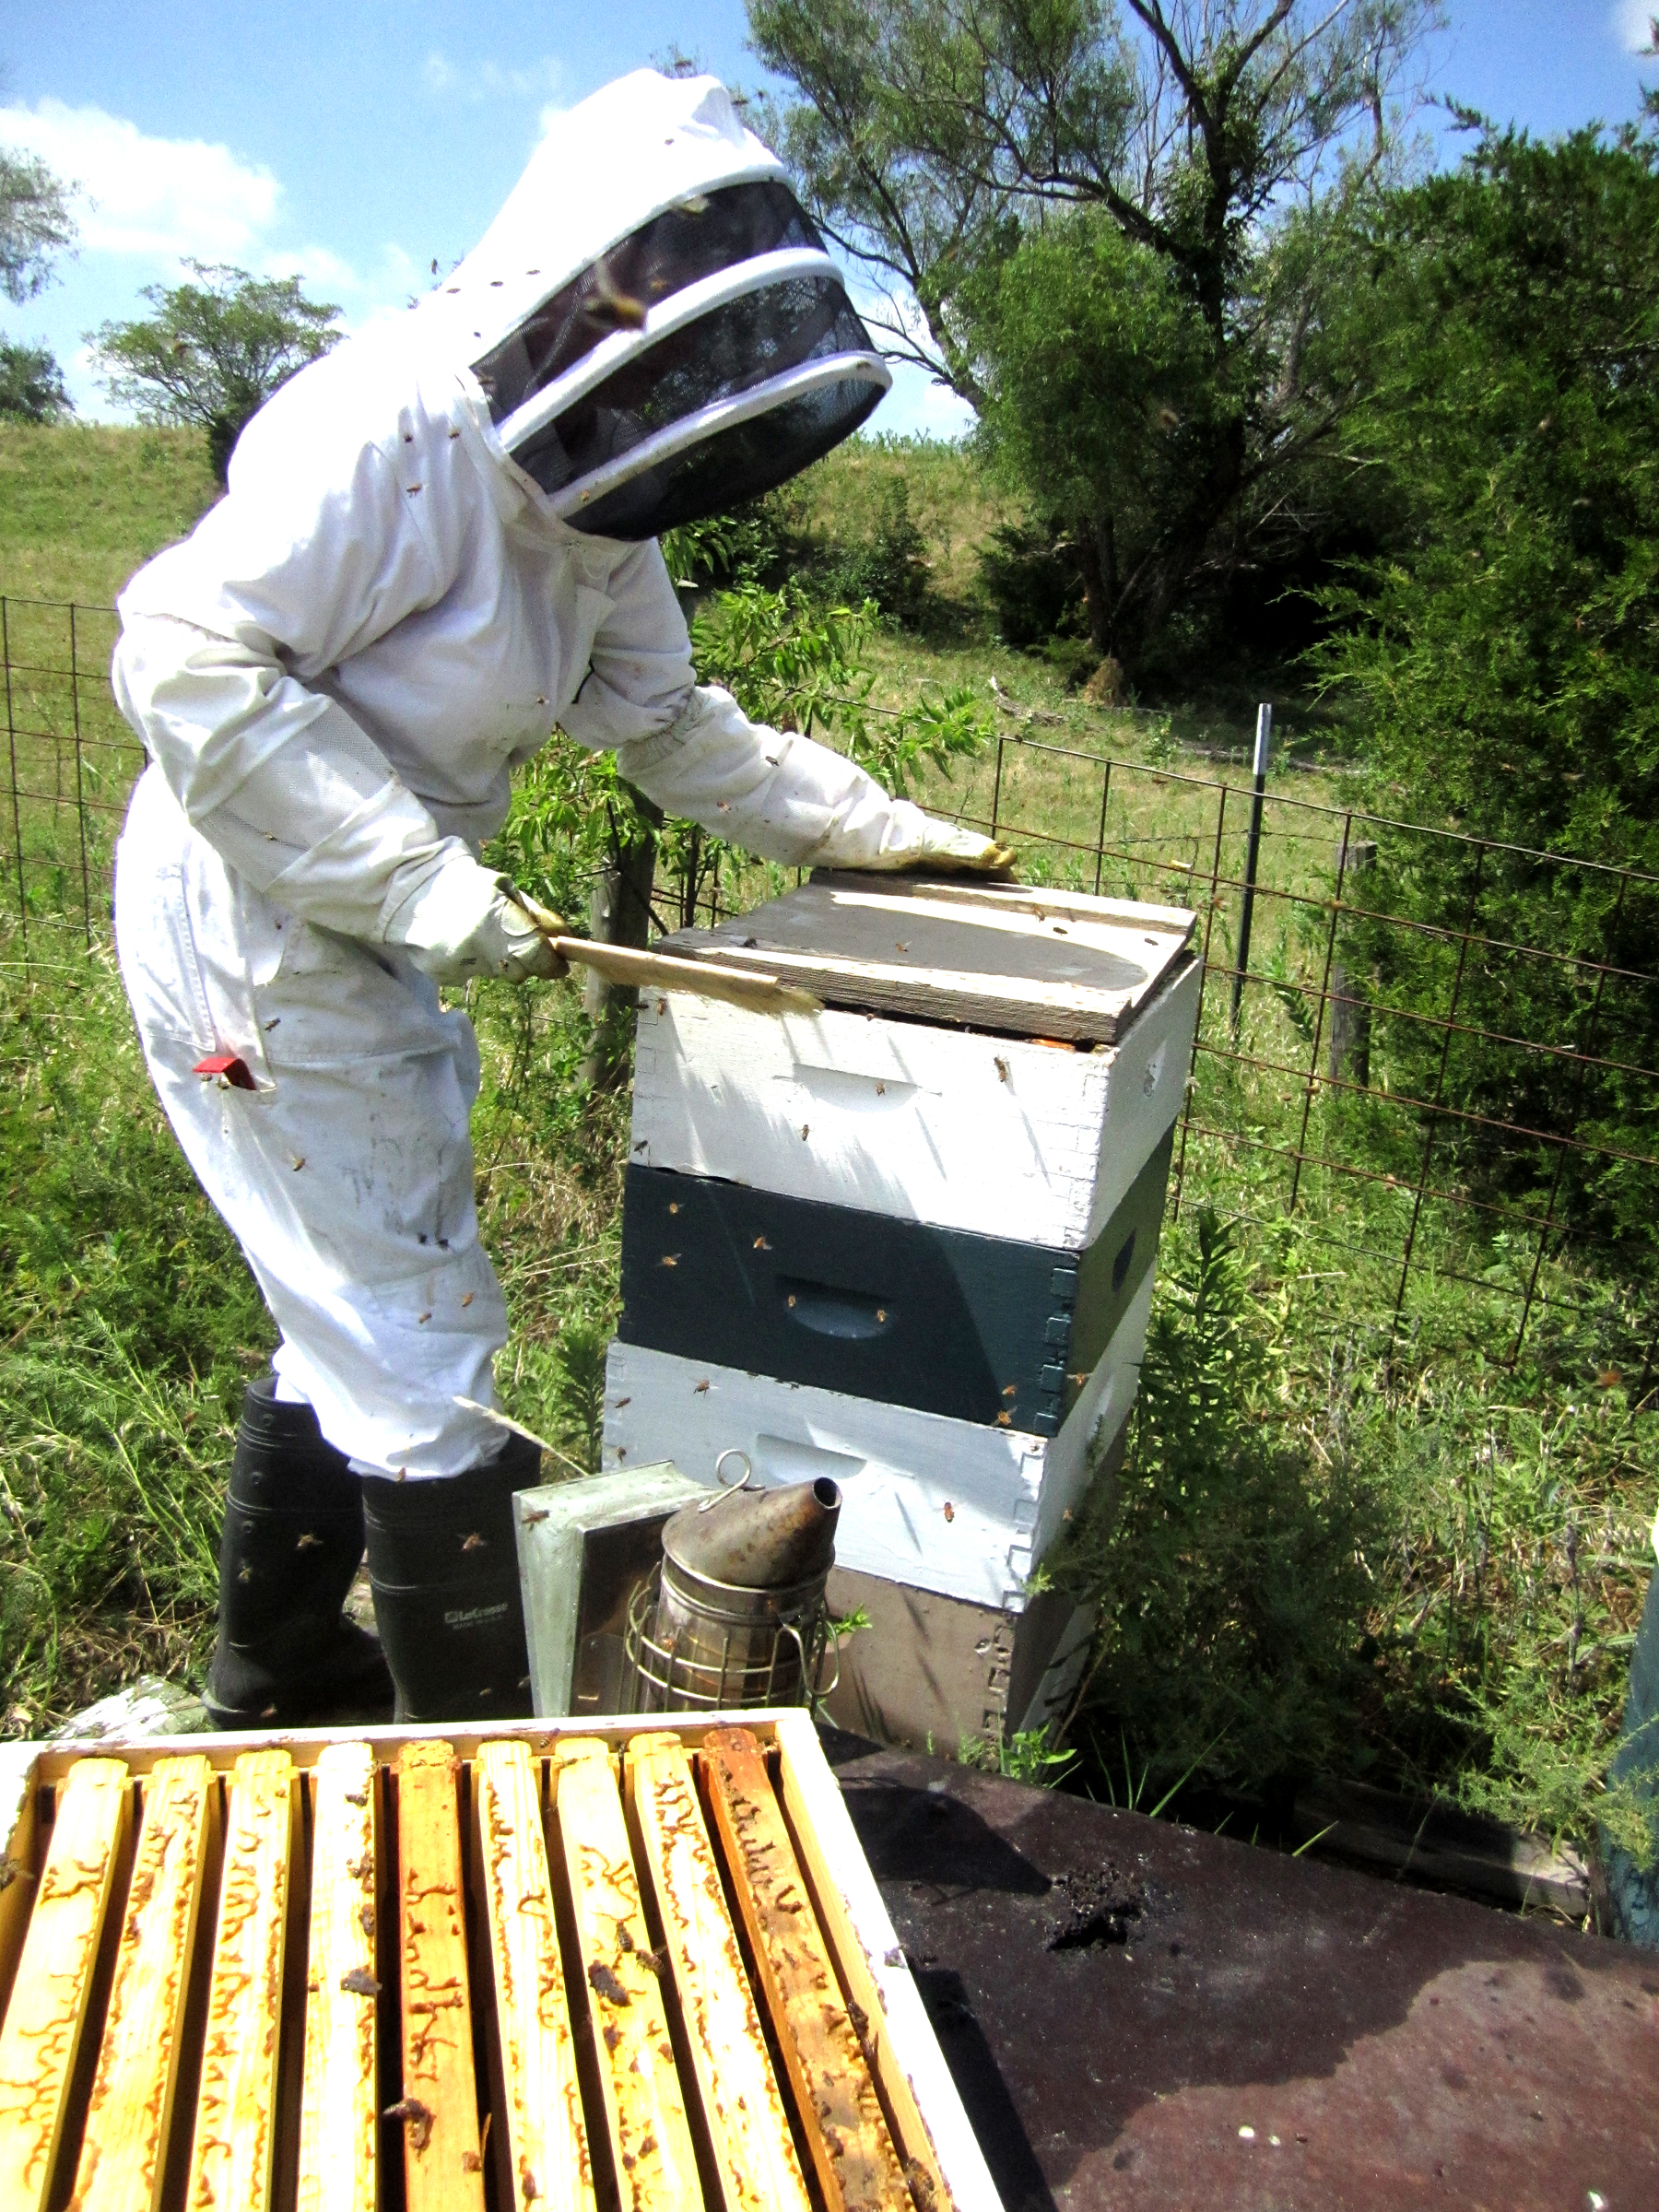 Opening each hive and removing frames full of capped honey - always being careful not to harm any bees.